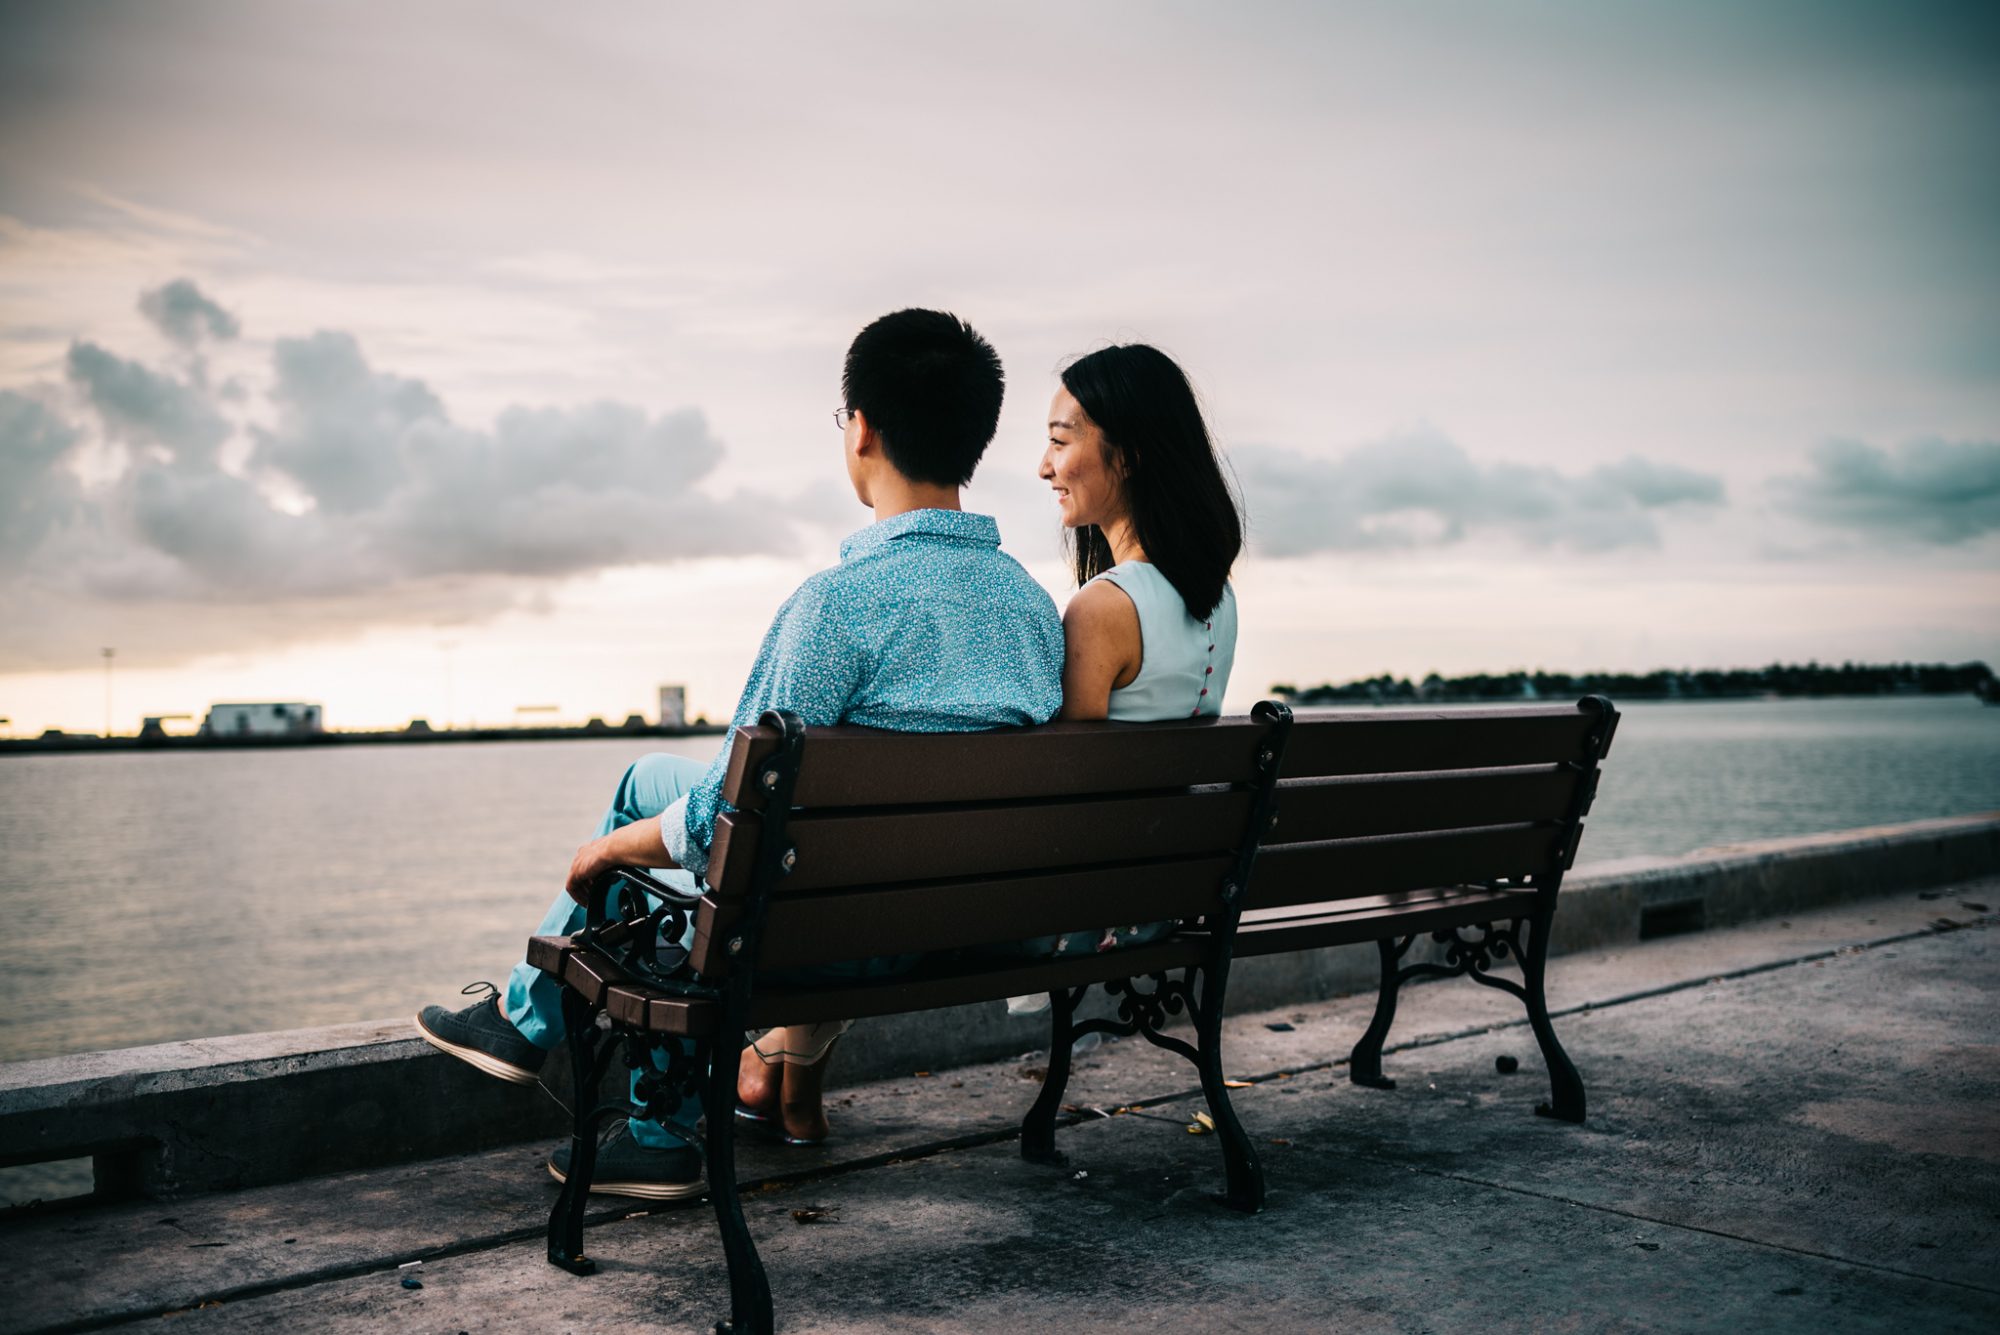 Xiao and Ying enjoying a sunset engagement session by the water in Key West, FL.